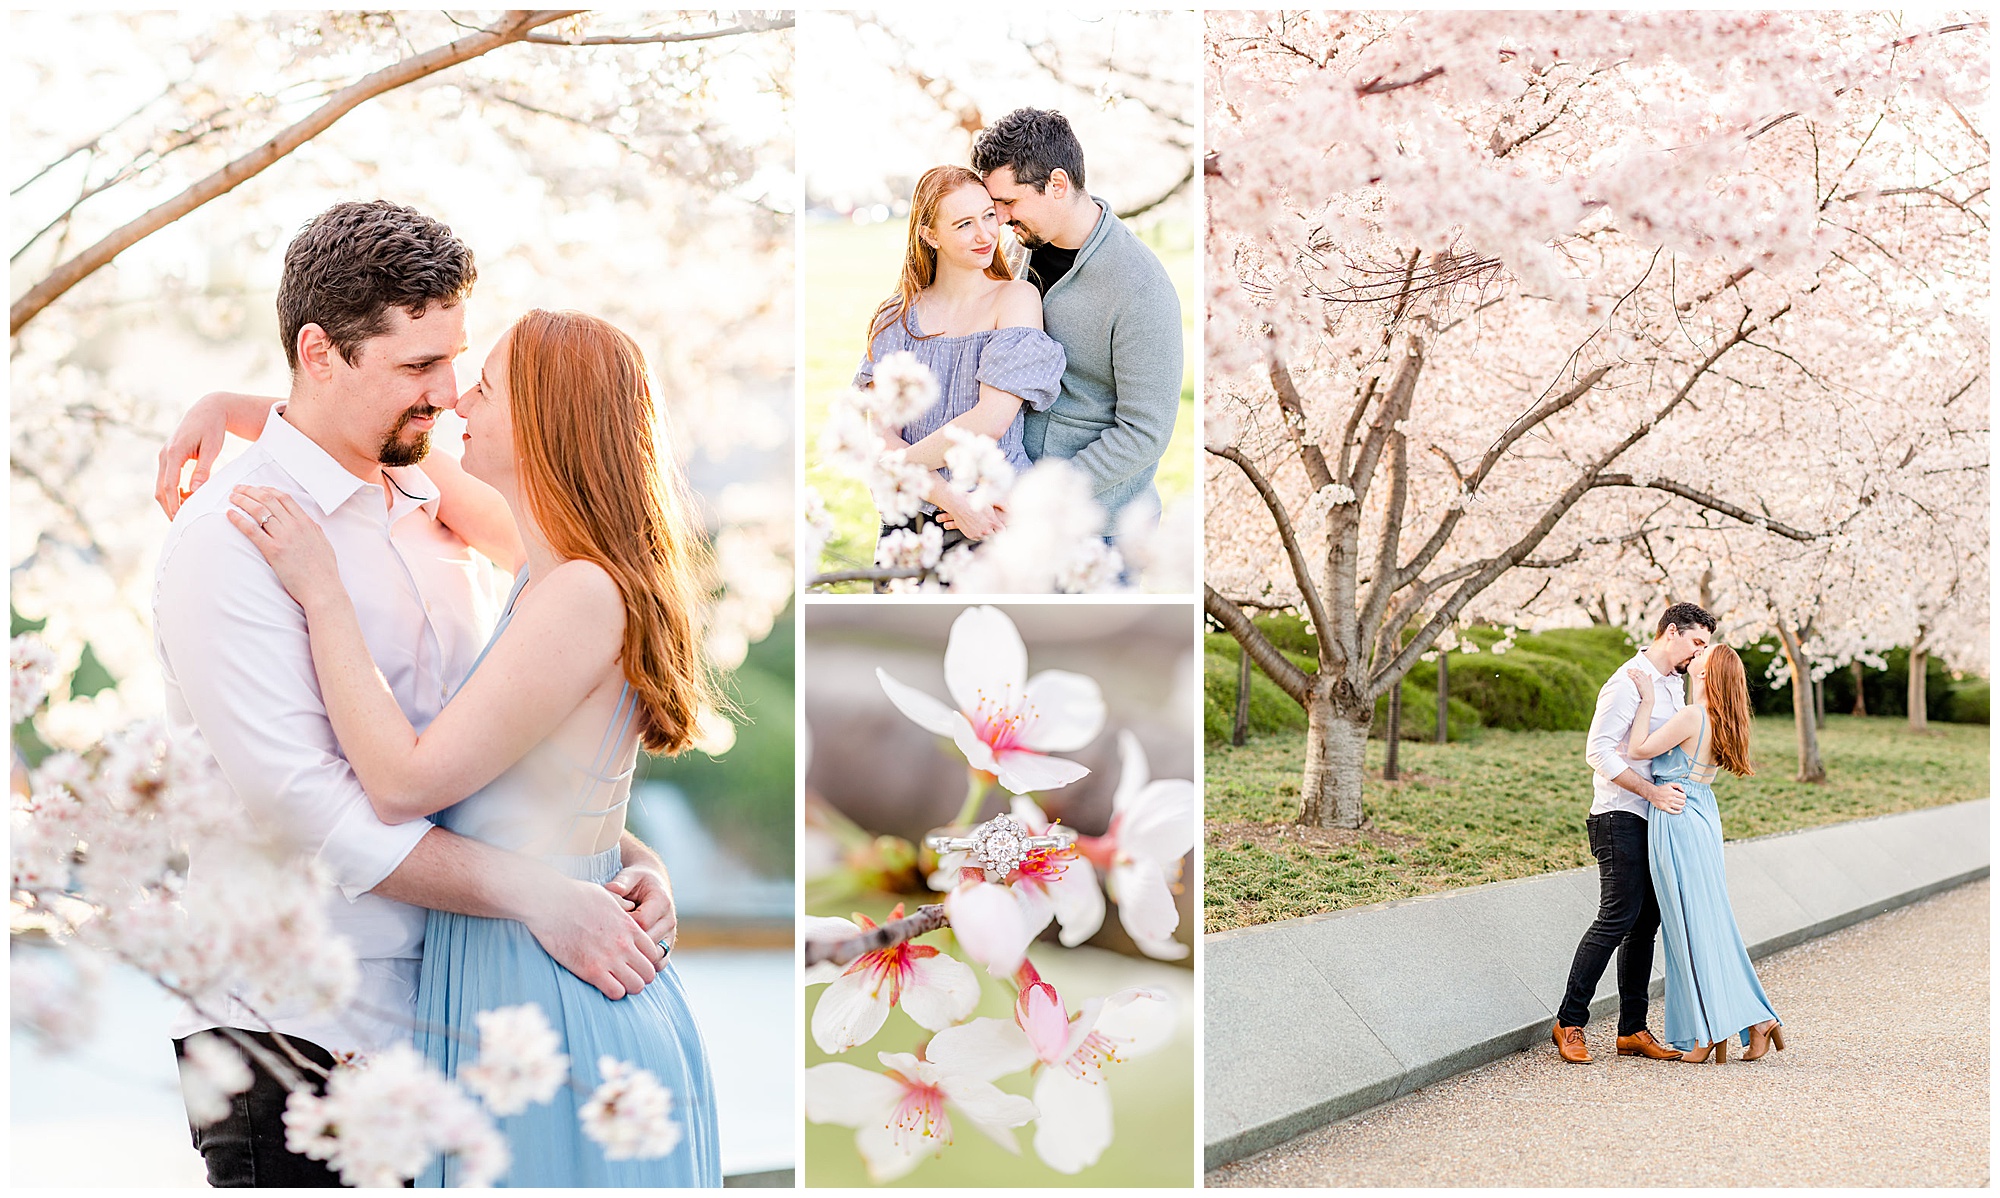 how to prepare for cherry blossoms photos, tips for cherry blossoms season, DC cherry blossoms photography, DC cherry blossoms photographer, photo session tips, cherry blossoms photos tips, DC cherry blossoms, Rachel E.H. Photography, D.C. cherry blossom engagement photos